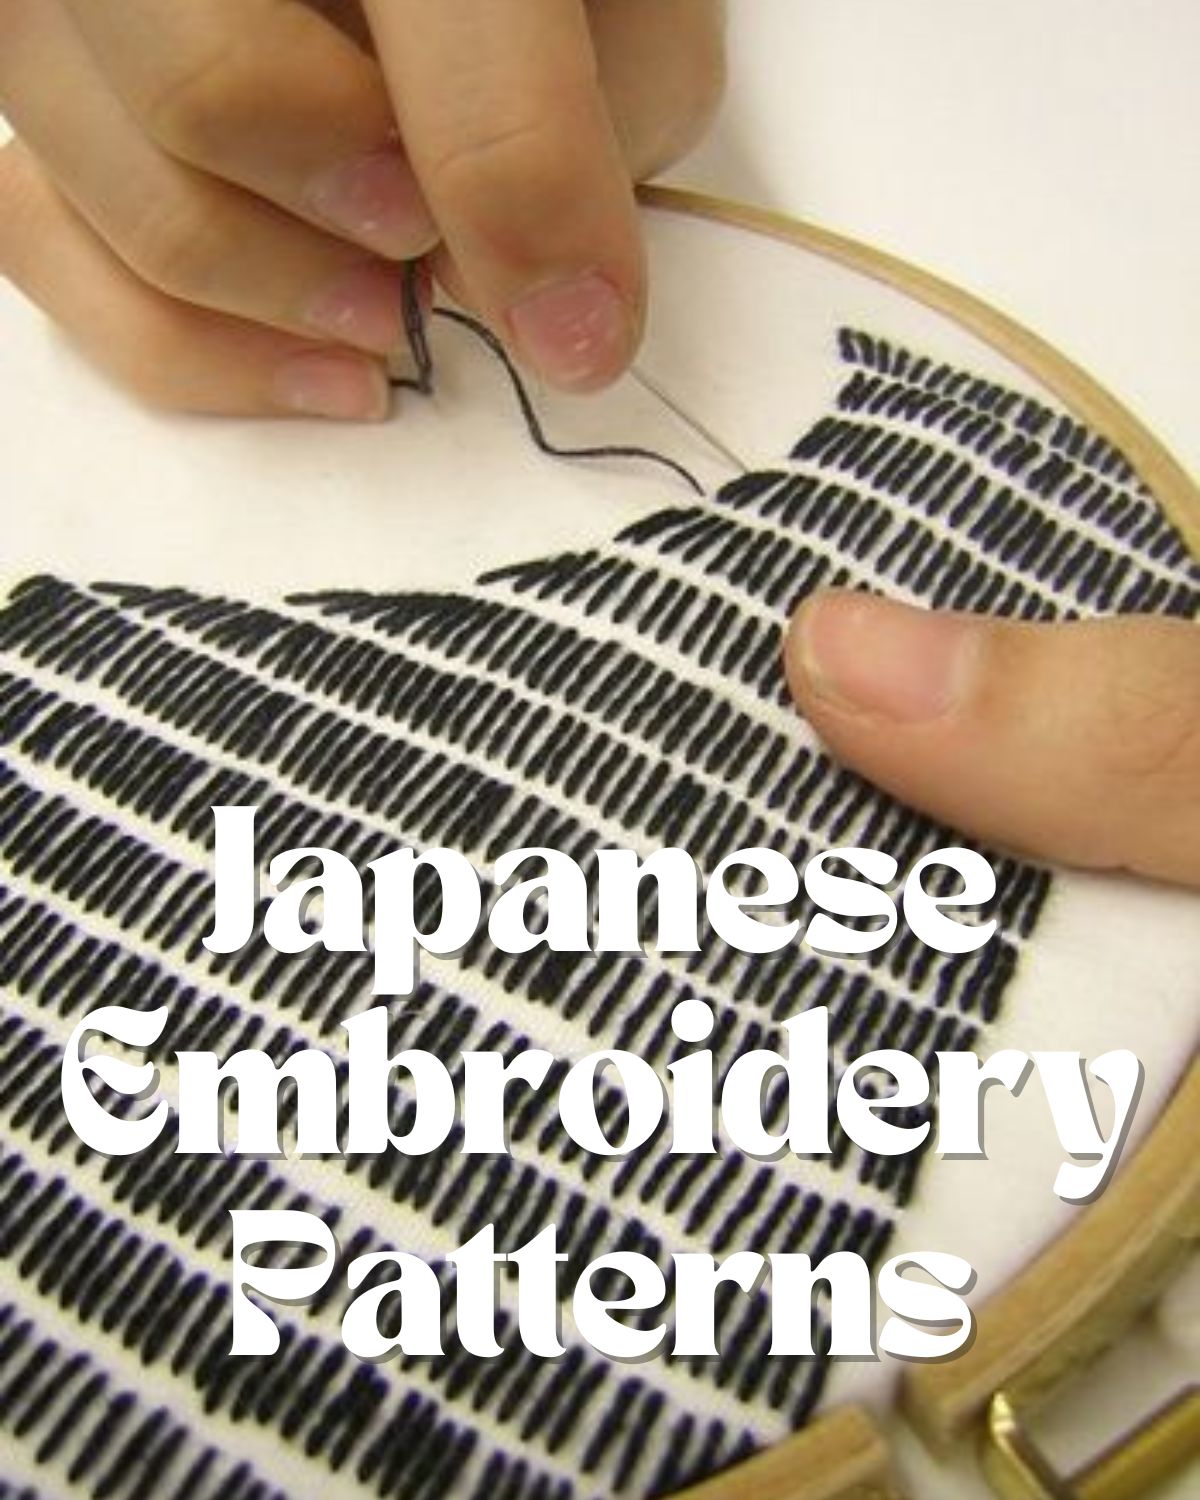 A close stitched Japanese embroidery patterns